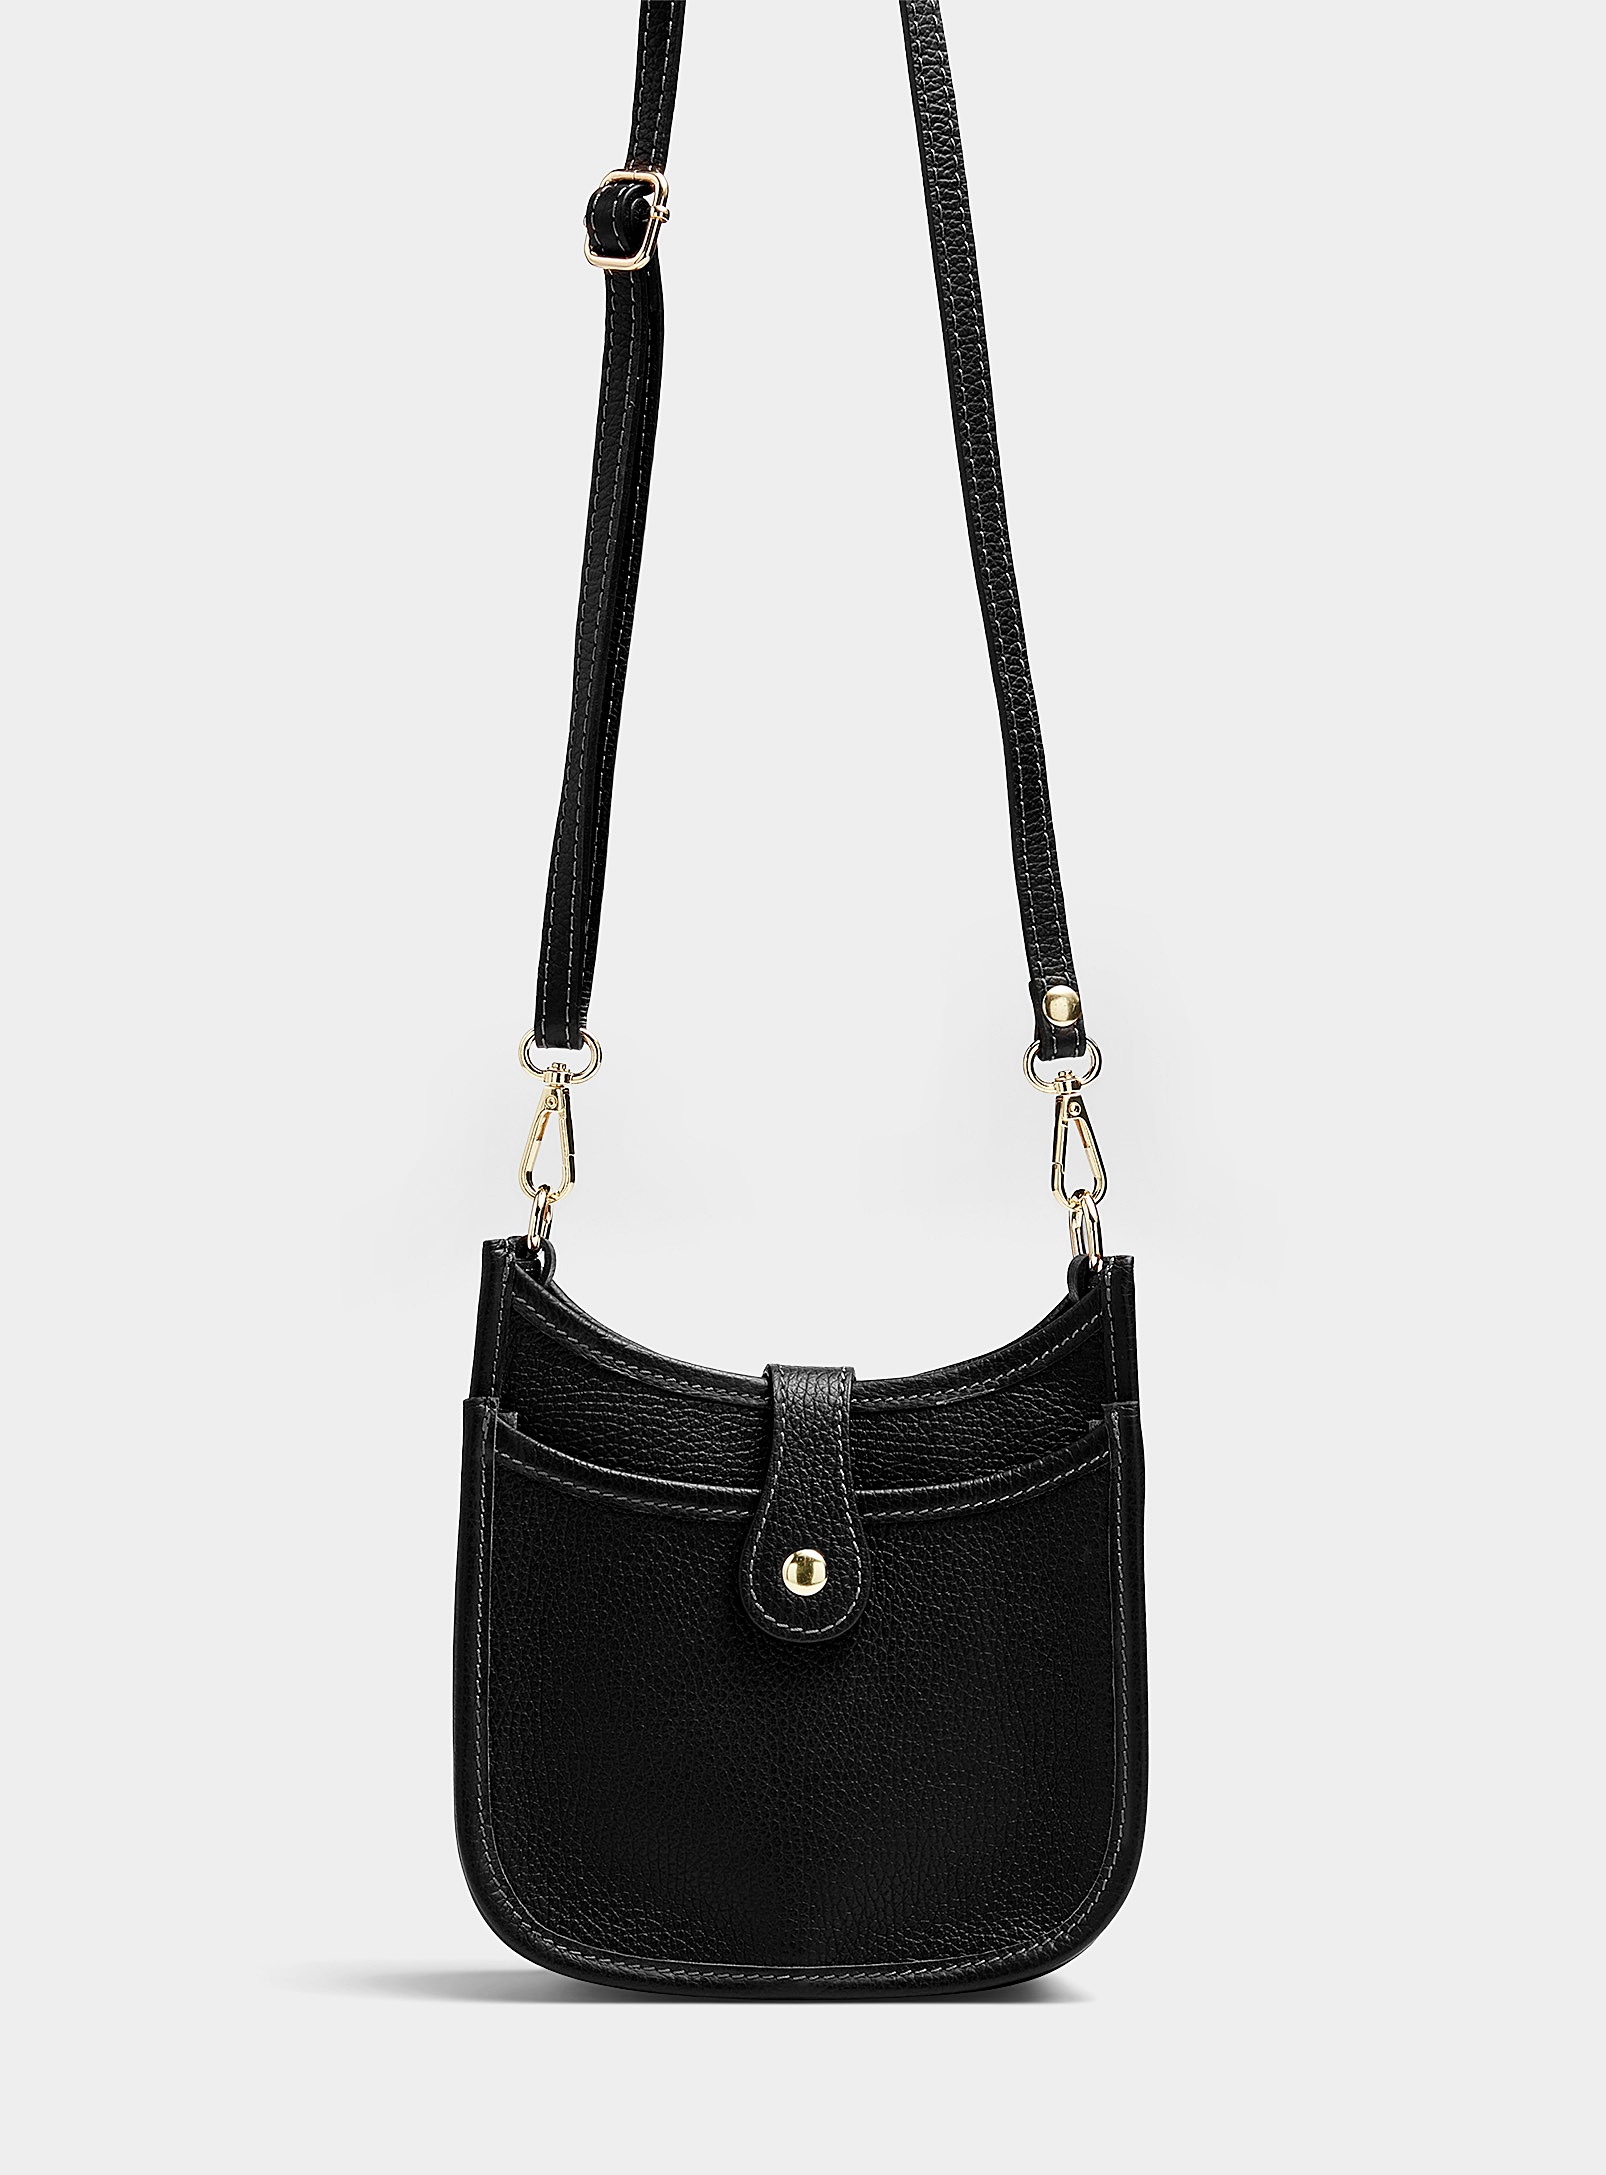 Simons - Women's Topstitched pebbled leather saddle bag Exclusive collection from Italy